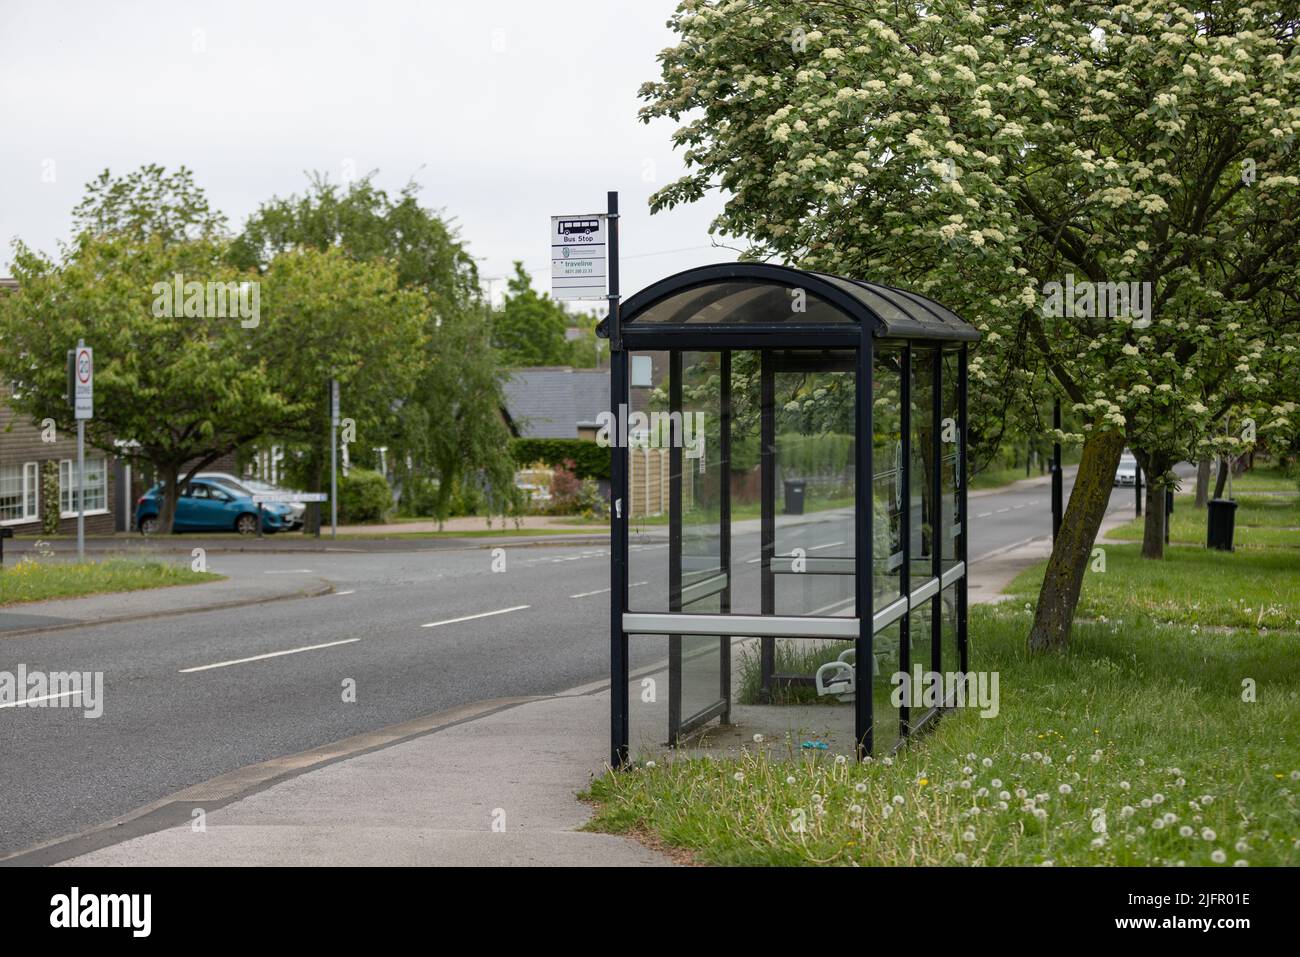 Public bus stop by a road in Harrogate, Yorkshire under a tree and on the grass Stock Photo